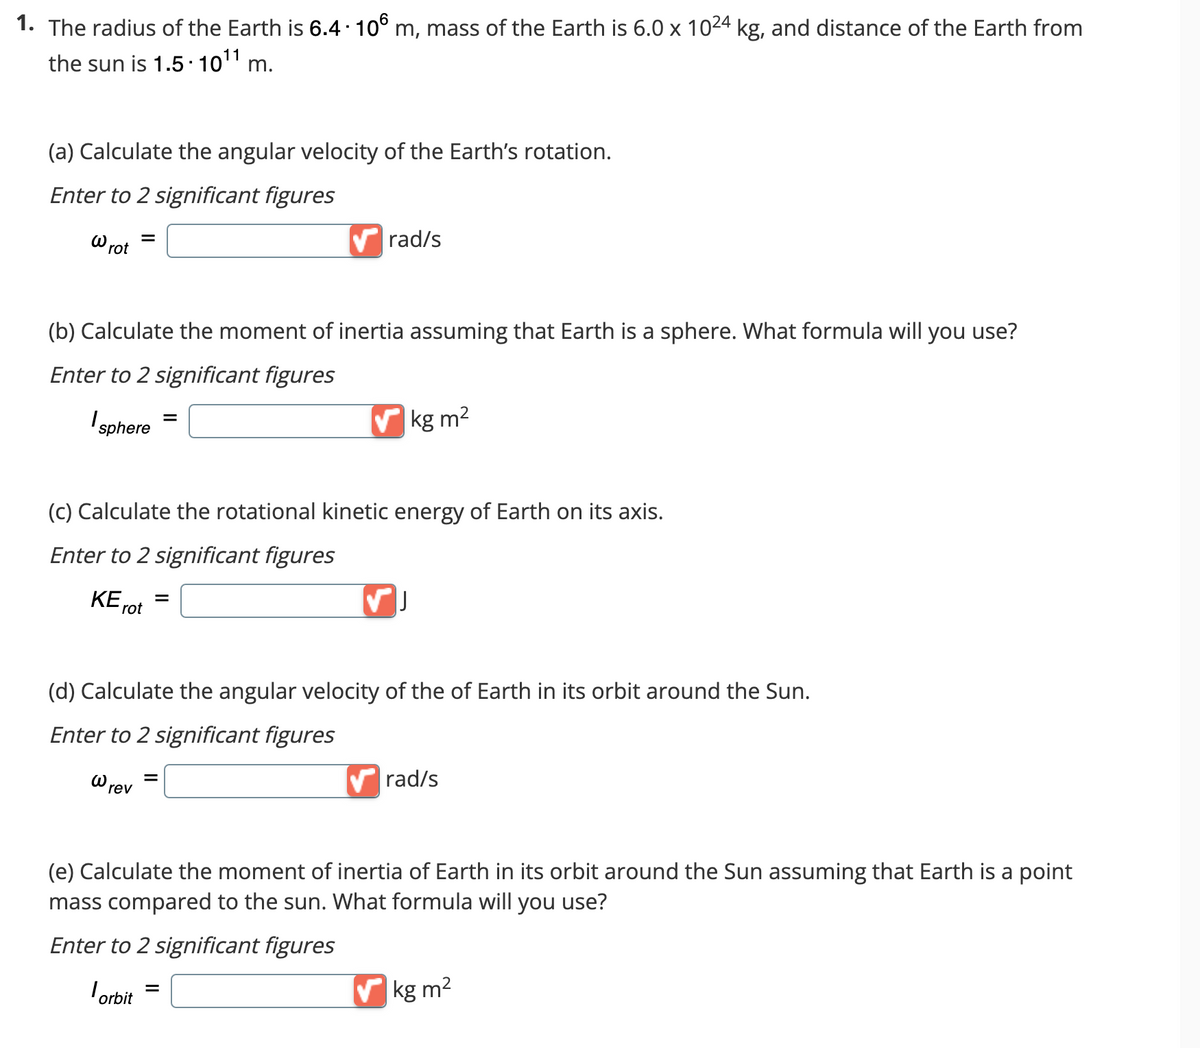 1. The radius of the Earth is 6.4 - 10⁰ m, mass of the Earth is 6.0 x 10²4 kg, and distance of the Earth from
the sun is 1.5.10¹1 m.
(a) Calculate the angular velocity of the Earth's rotation.
Enter to 2 significant figures
W rot
(b) Calculate the moment of inertia assuming that Earth is a sphere. What formula will you use?
Enter to 2 significant figures
I sphere
ΚΕ
=
ω
(c) Calculate the rotational kinetic energy of Earth on its axis.
Enter to 2 significant figures
rot
rev
=
✔rad/s
=
=
✔kg m²
(d) Calculate the angular velocity of the of Earth in its orbit around the Sun.
Enter to 2 significant figures
✓
✔rad/s
(e) Calculate the moment of inertia of Earth in its orbit around the Sun assuming that Earth is a point
mass compared to the sun. What formula will you use?
Enter to 2 significant figures
orbit =
✔kg m²